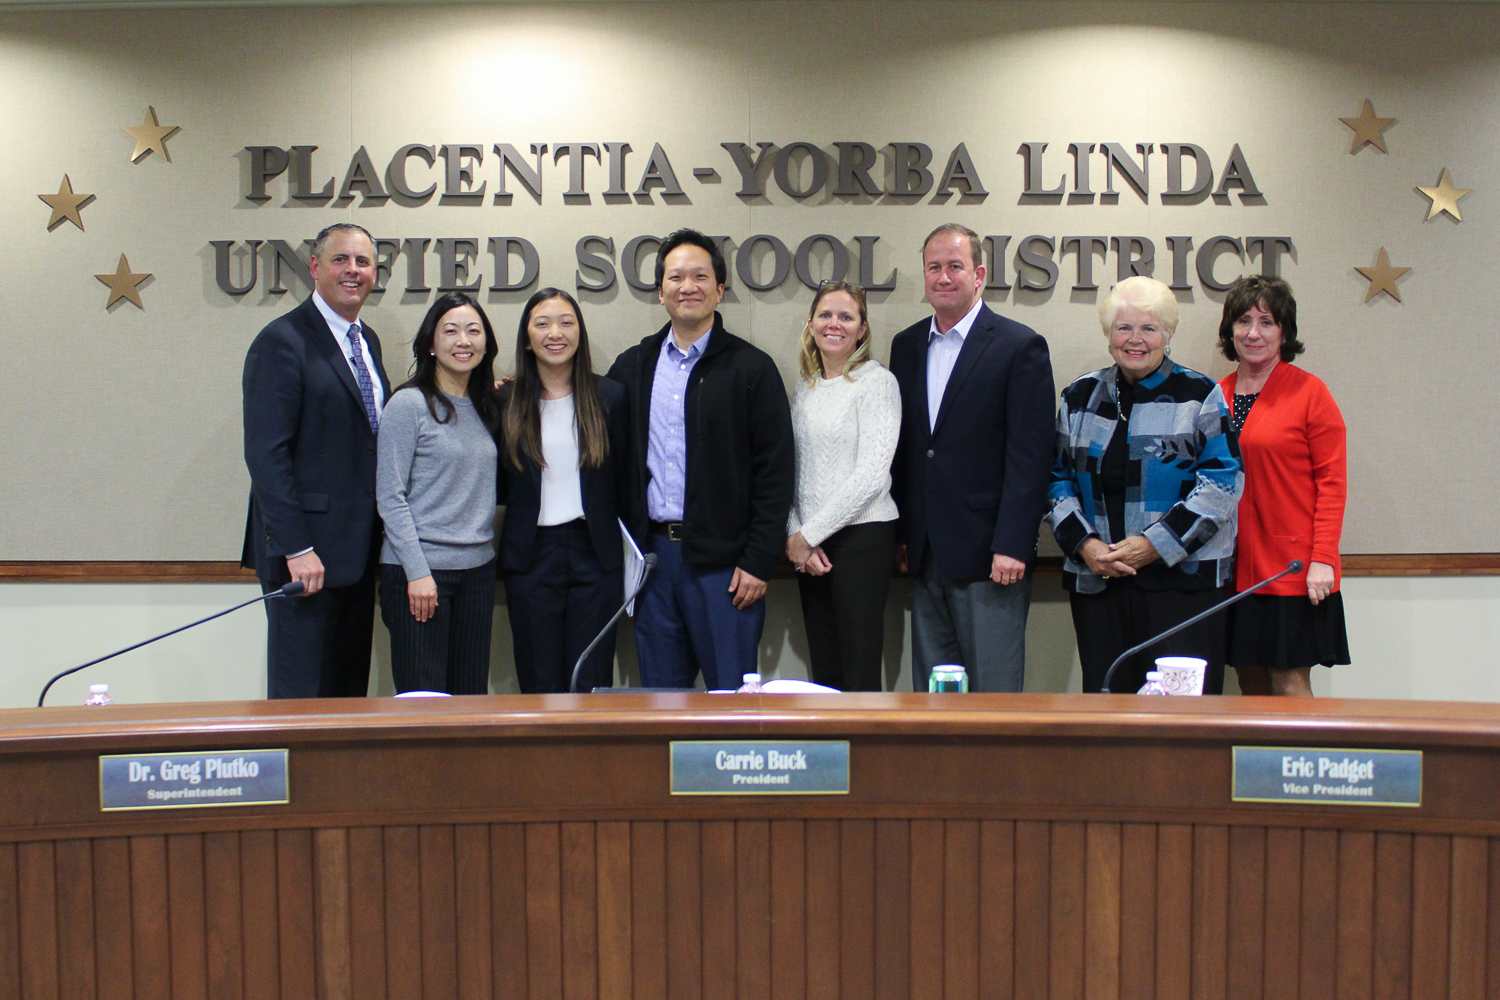 Pictured left to right, Superintendent, Dr. Greg Plutko, Sophia and her parents, Susan and Sam, President, Carrie Buck, Vice President, Eric Padget, and Trustees, Judi Carmona and Karin Freeman on Tuesday, January 15, 2019.